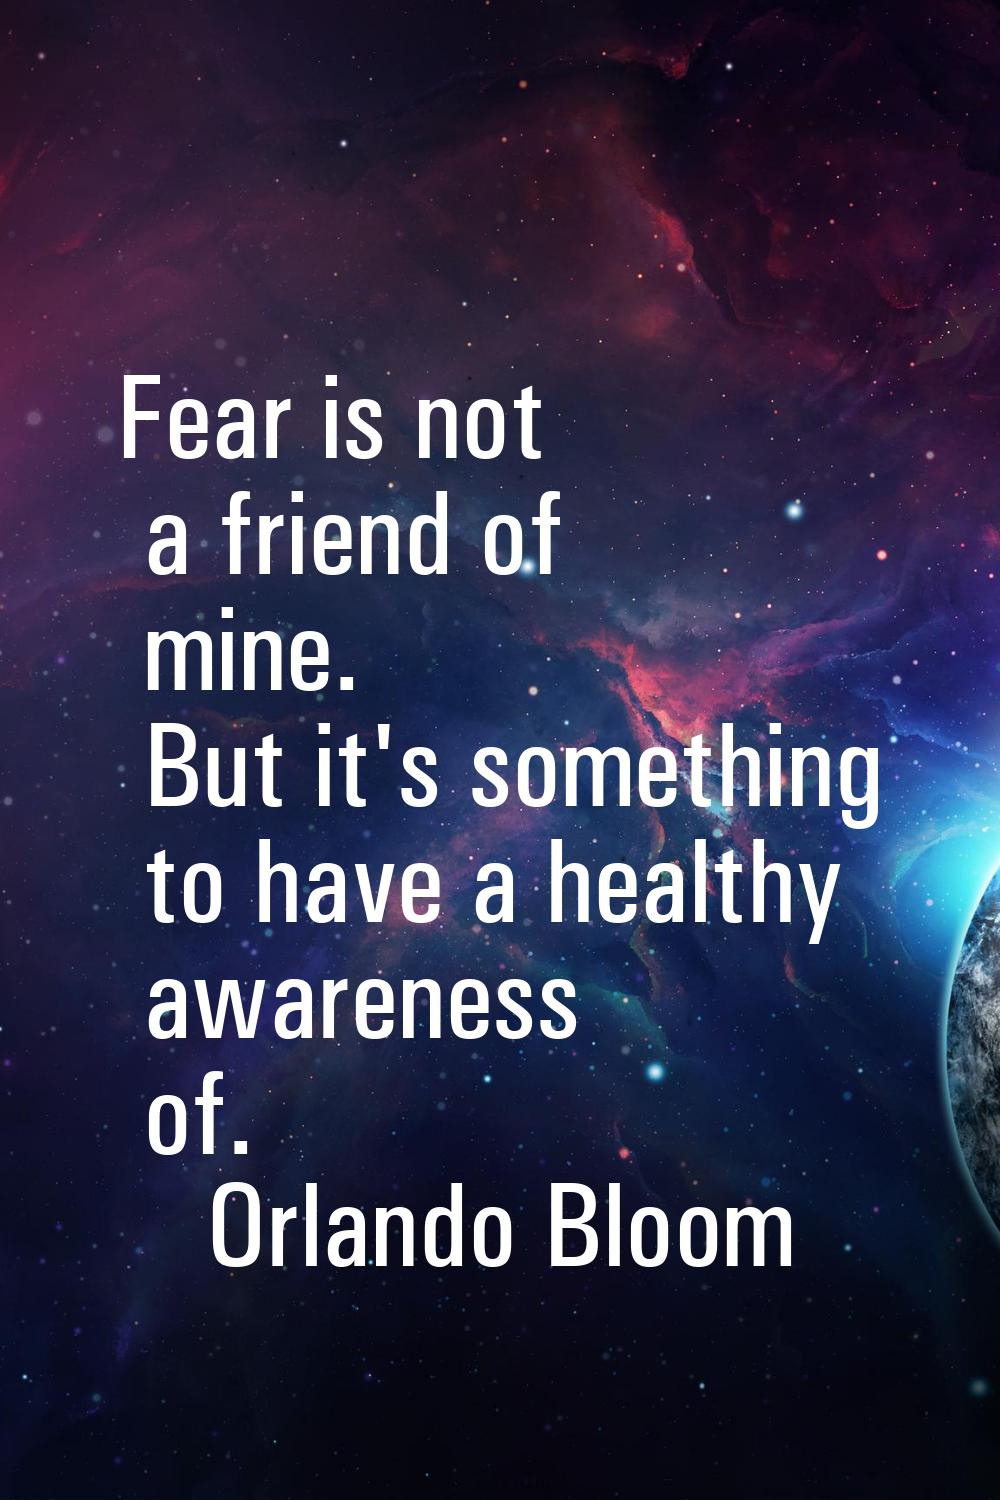 Fear is not a friend of mine. But it's something to have a healthy awareness of.